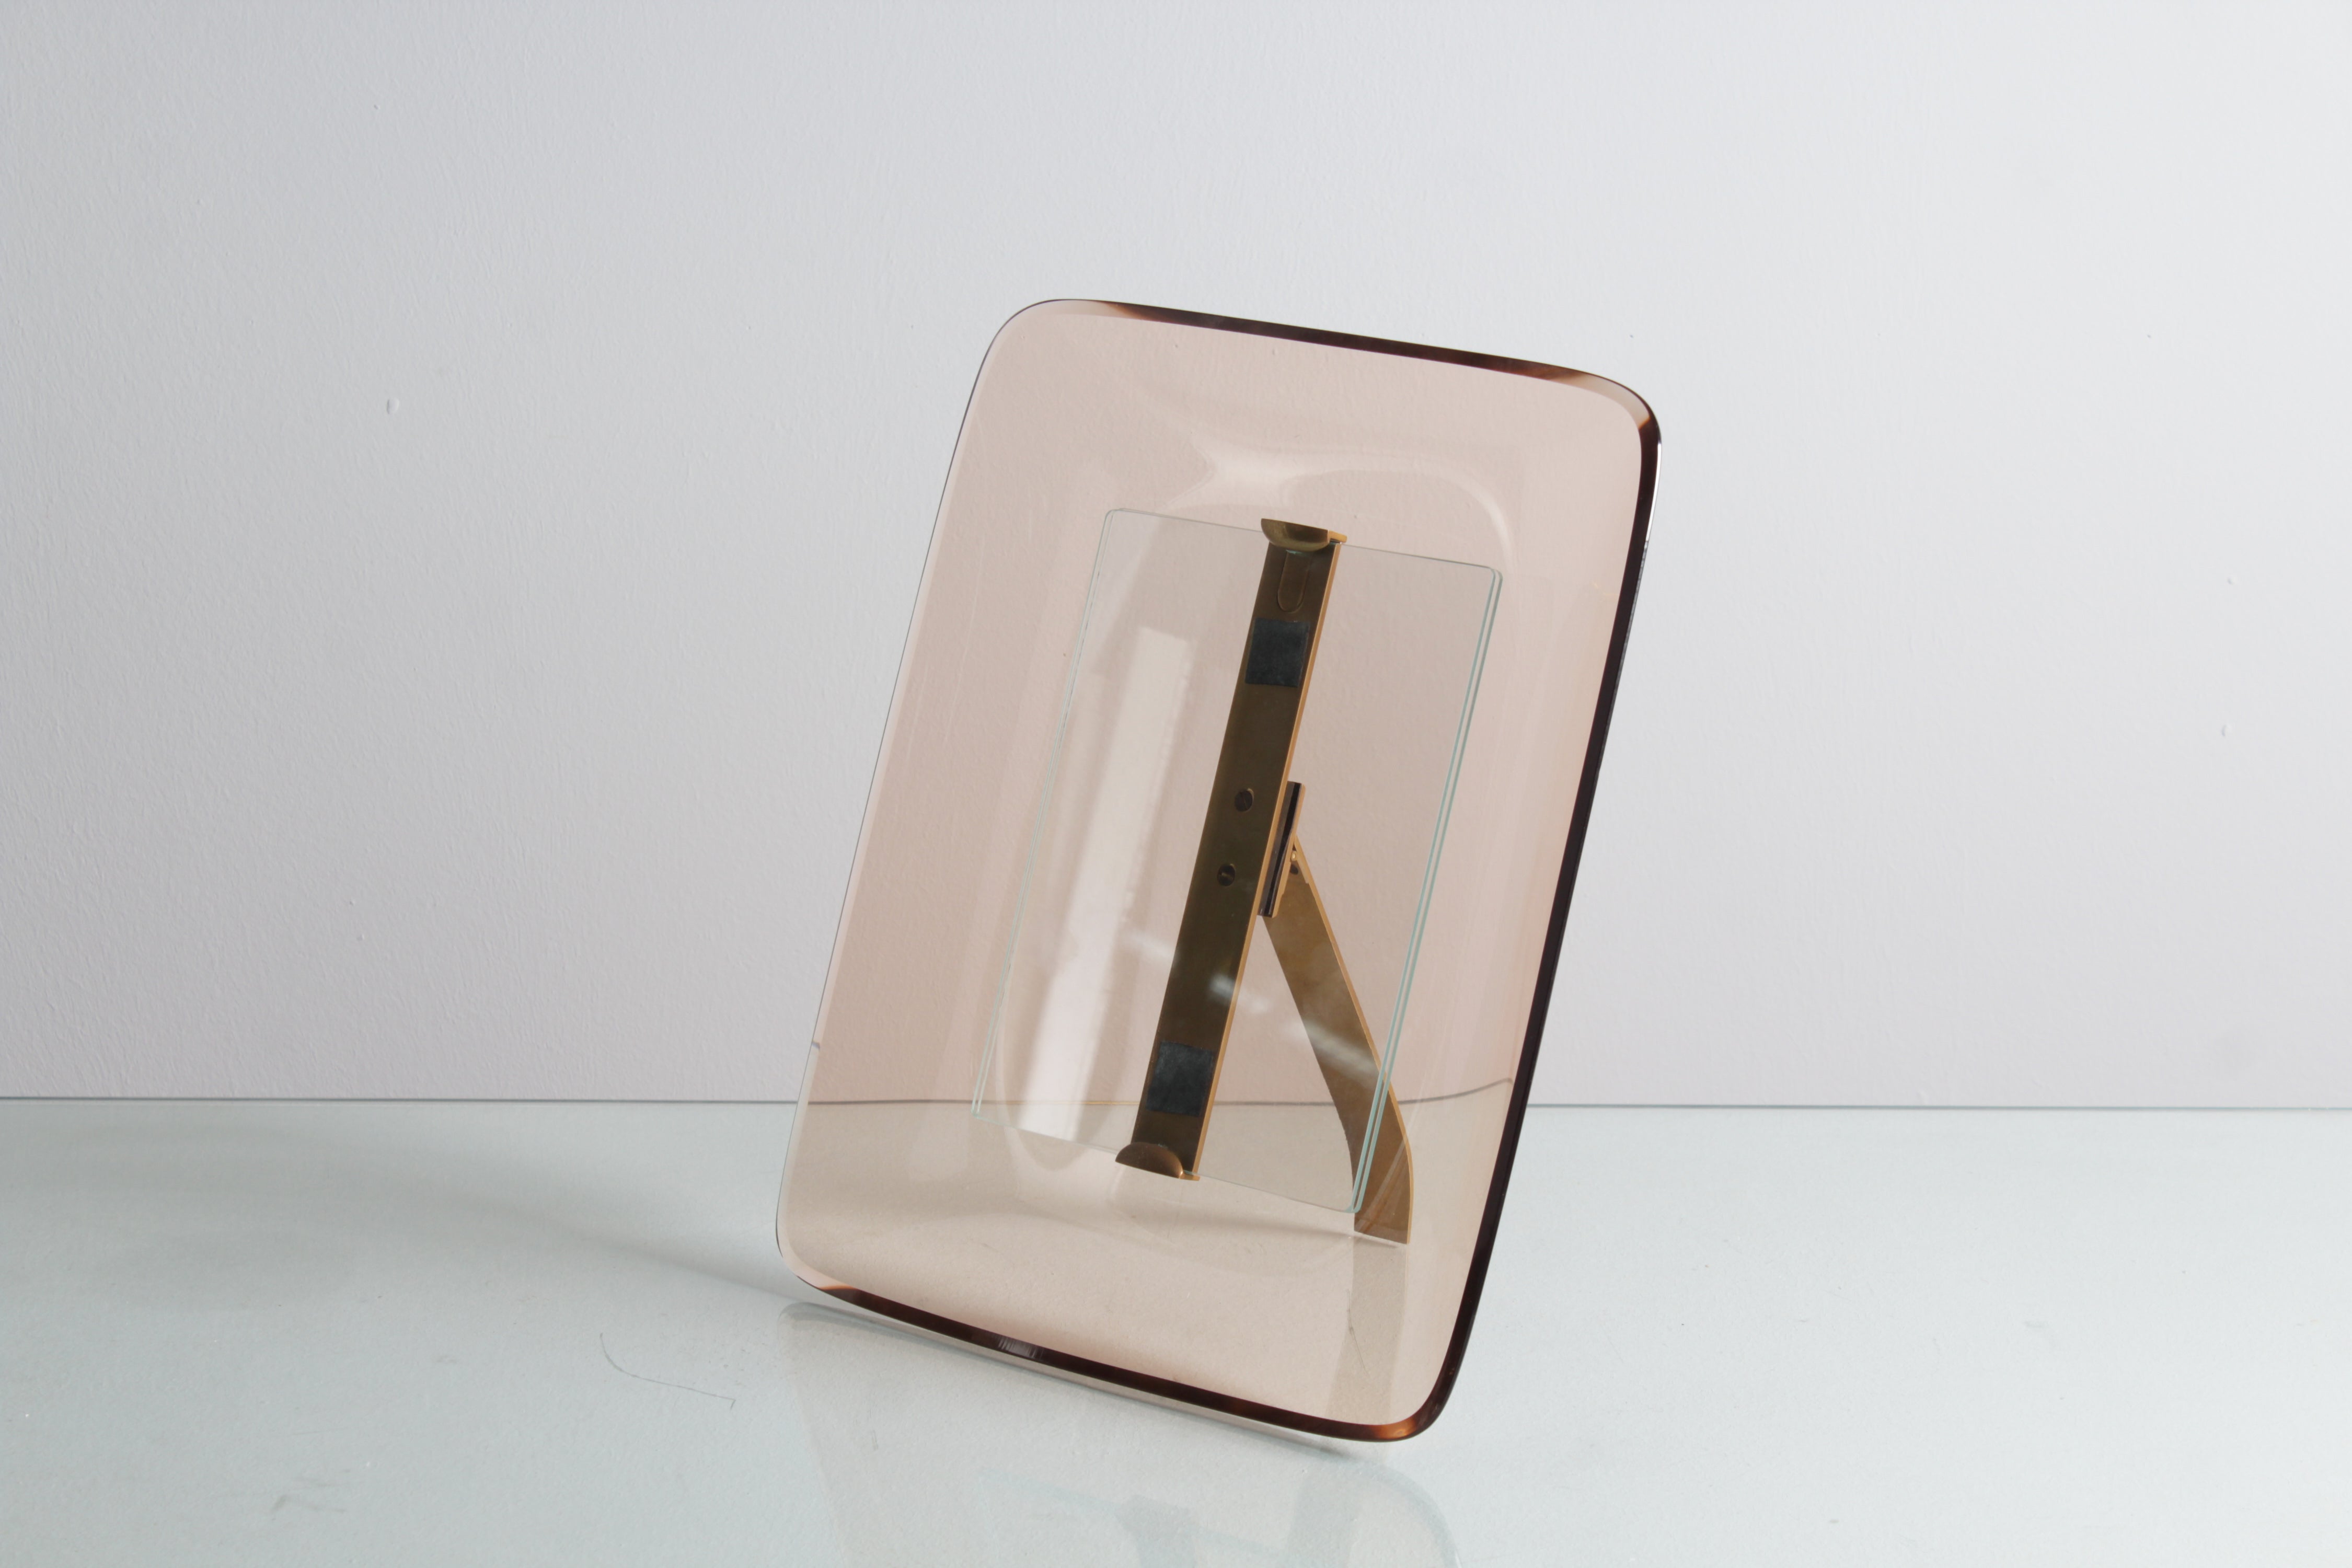 Wonderful portrait frame with pink curved crystal frame of rectangular shape with rounded edges, brass support. Designed by Max Ingrand for Fontana Arte, Italian production since 1939. Wear consistent with age and use.
Depth of the portrait frame